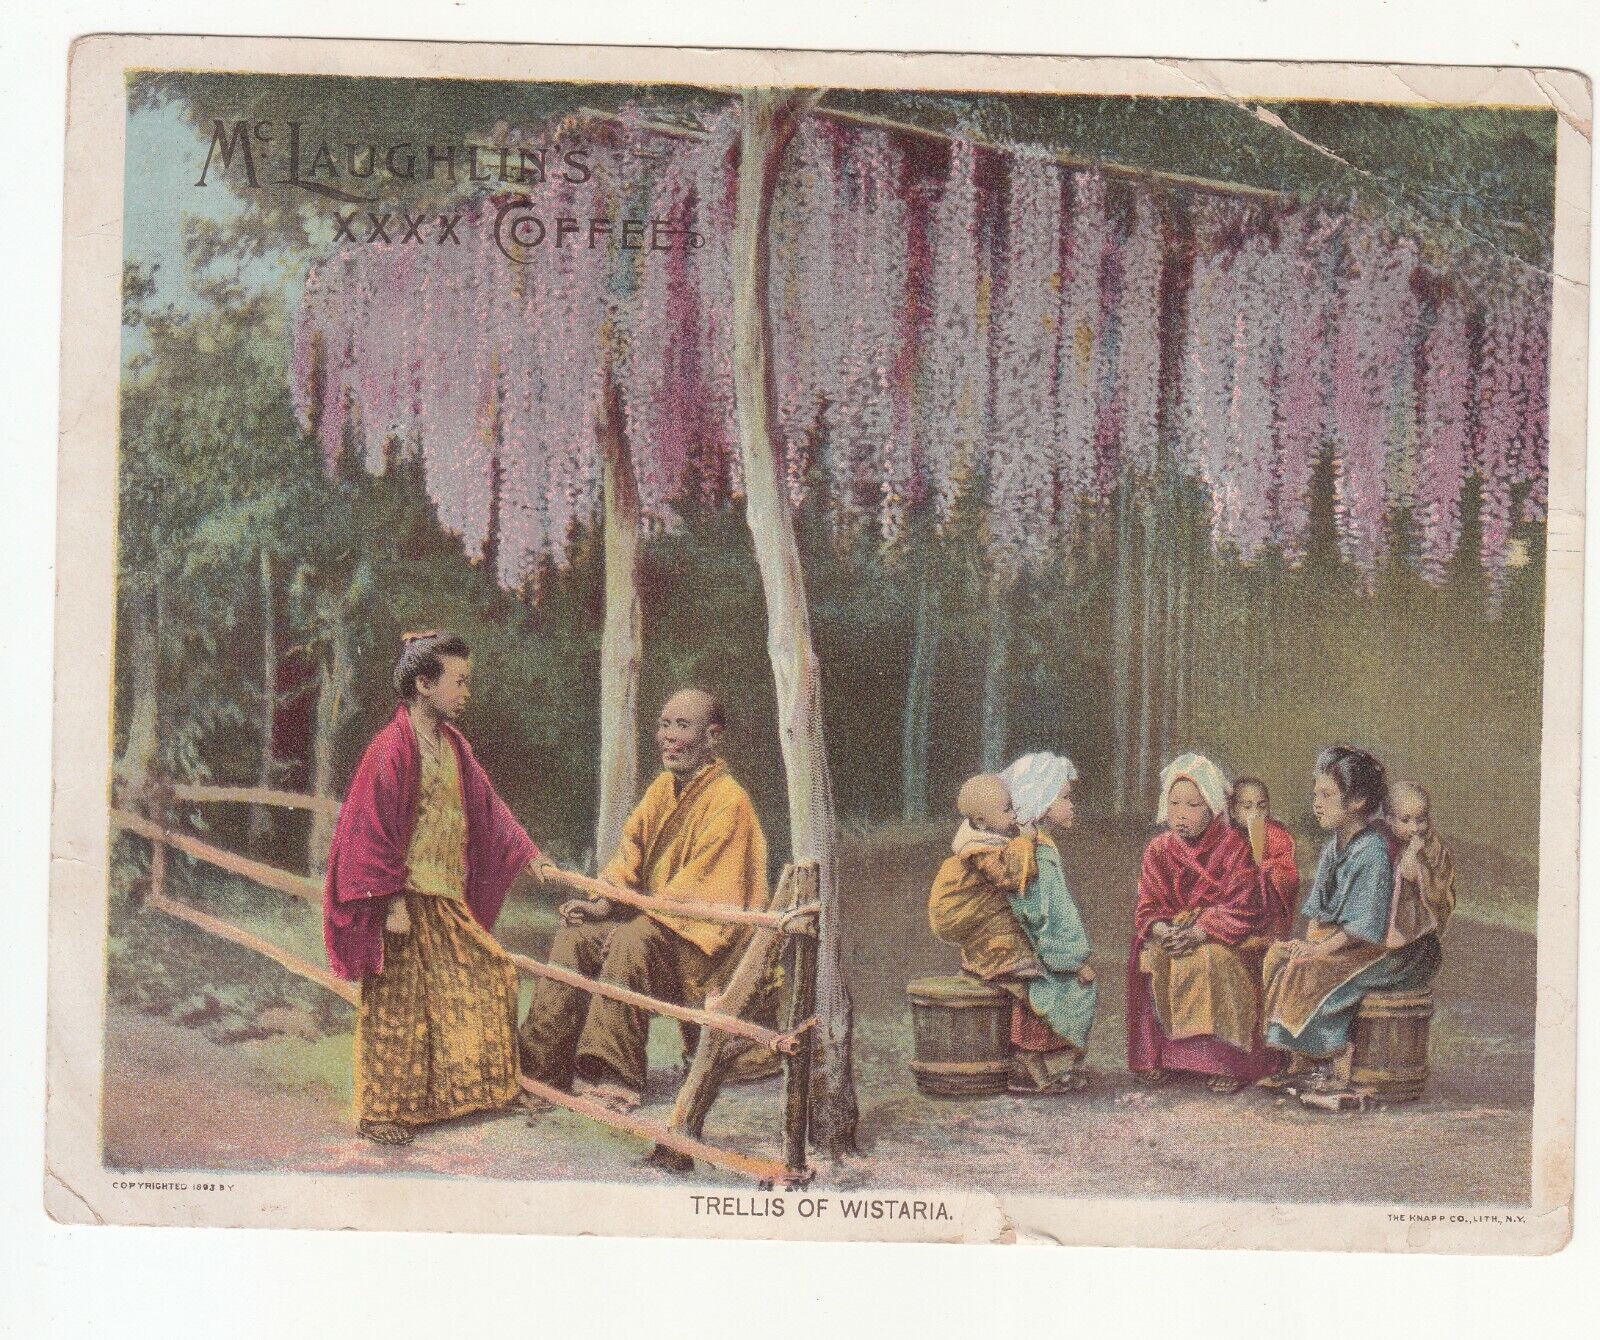 McLaughlin\'s XXXX Coffee Trellis of Wistaria Chinese Peasants Vict Card c1880s